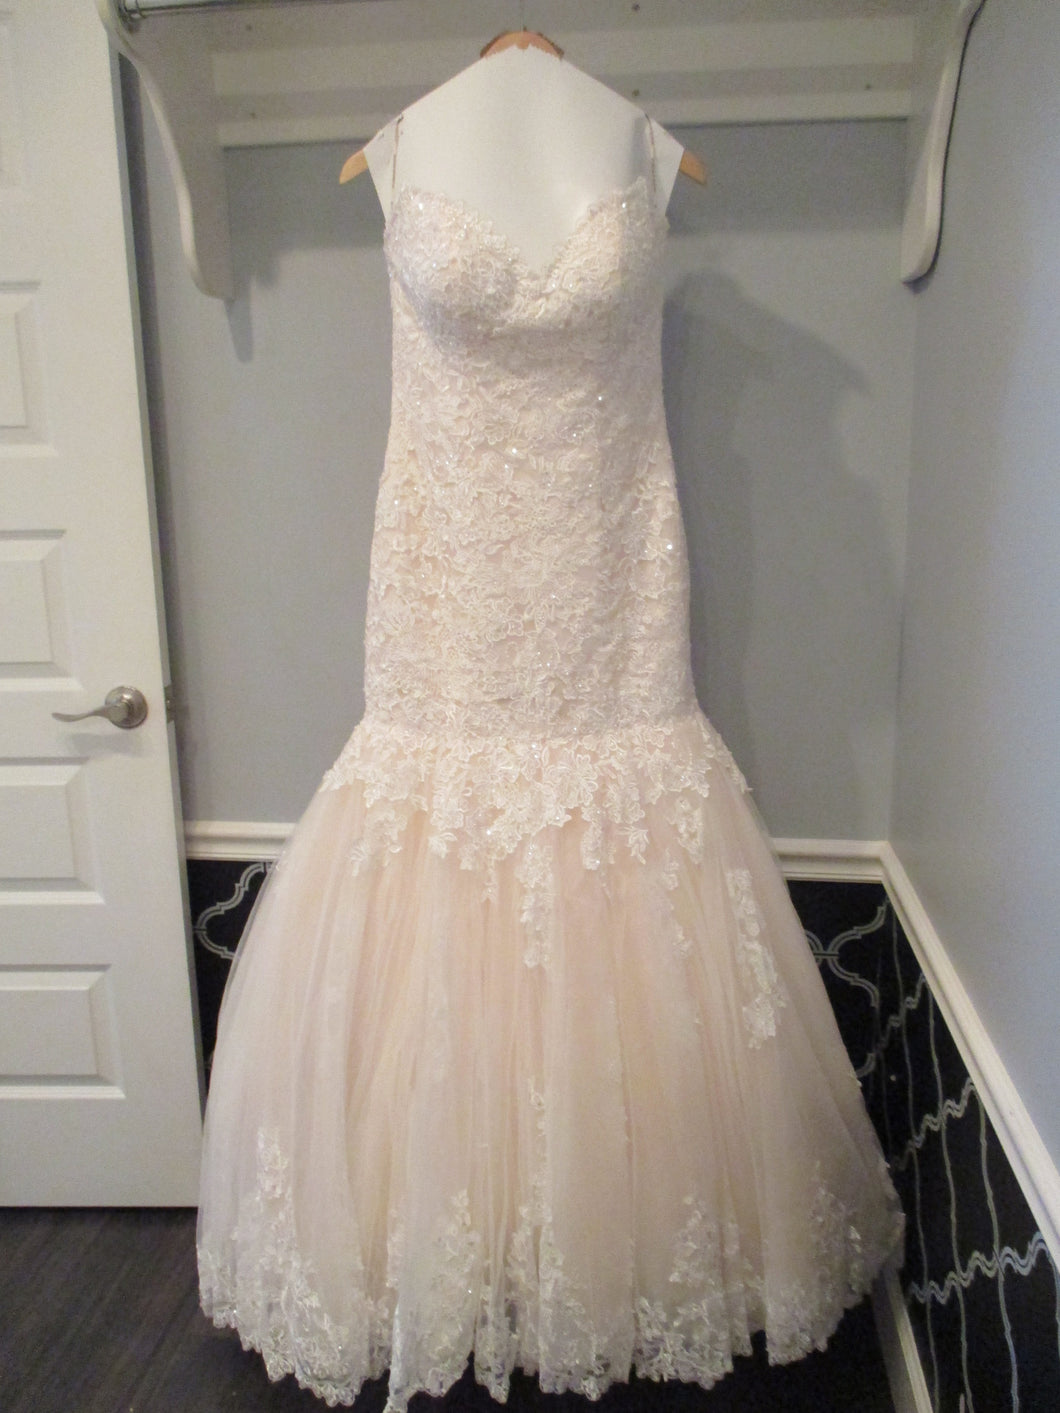 Maggie Sottero 'Marianne' - Maggie Sottero - Nearly Newlywed Bridal Boutique - 1